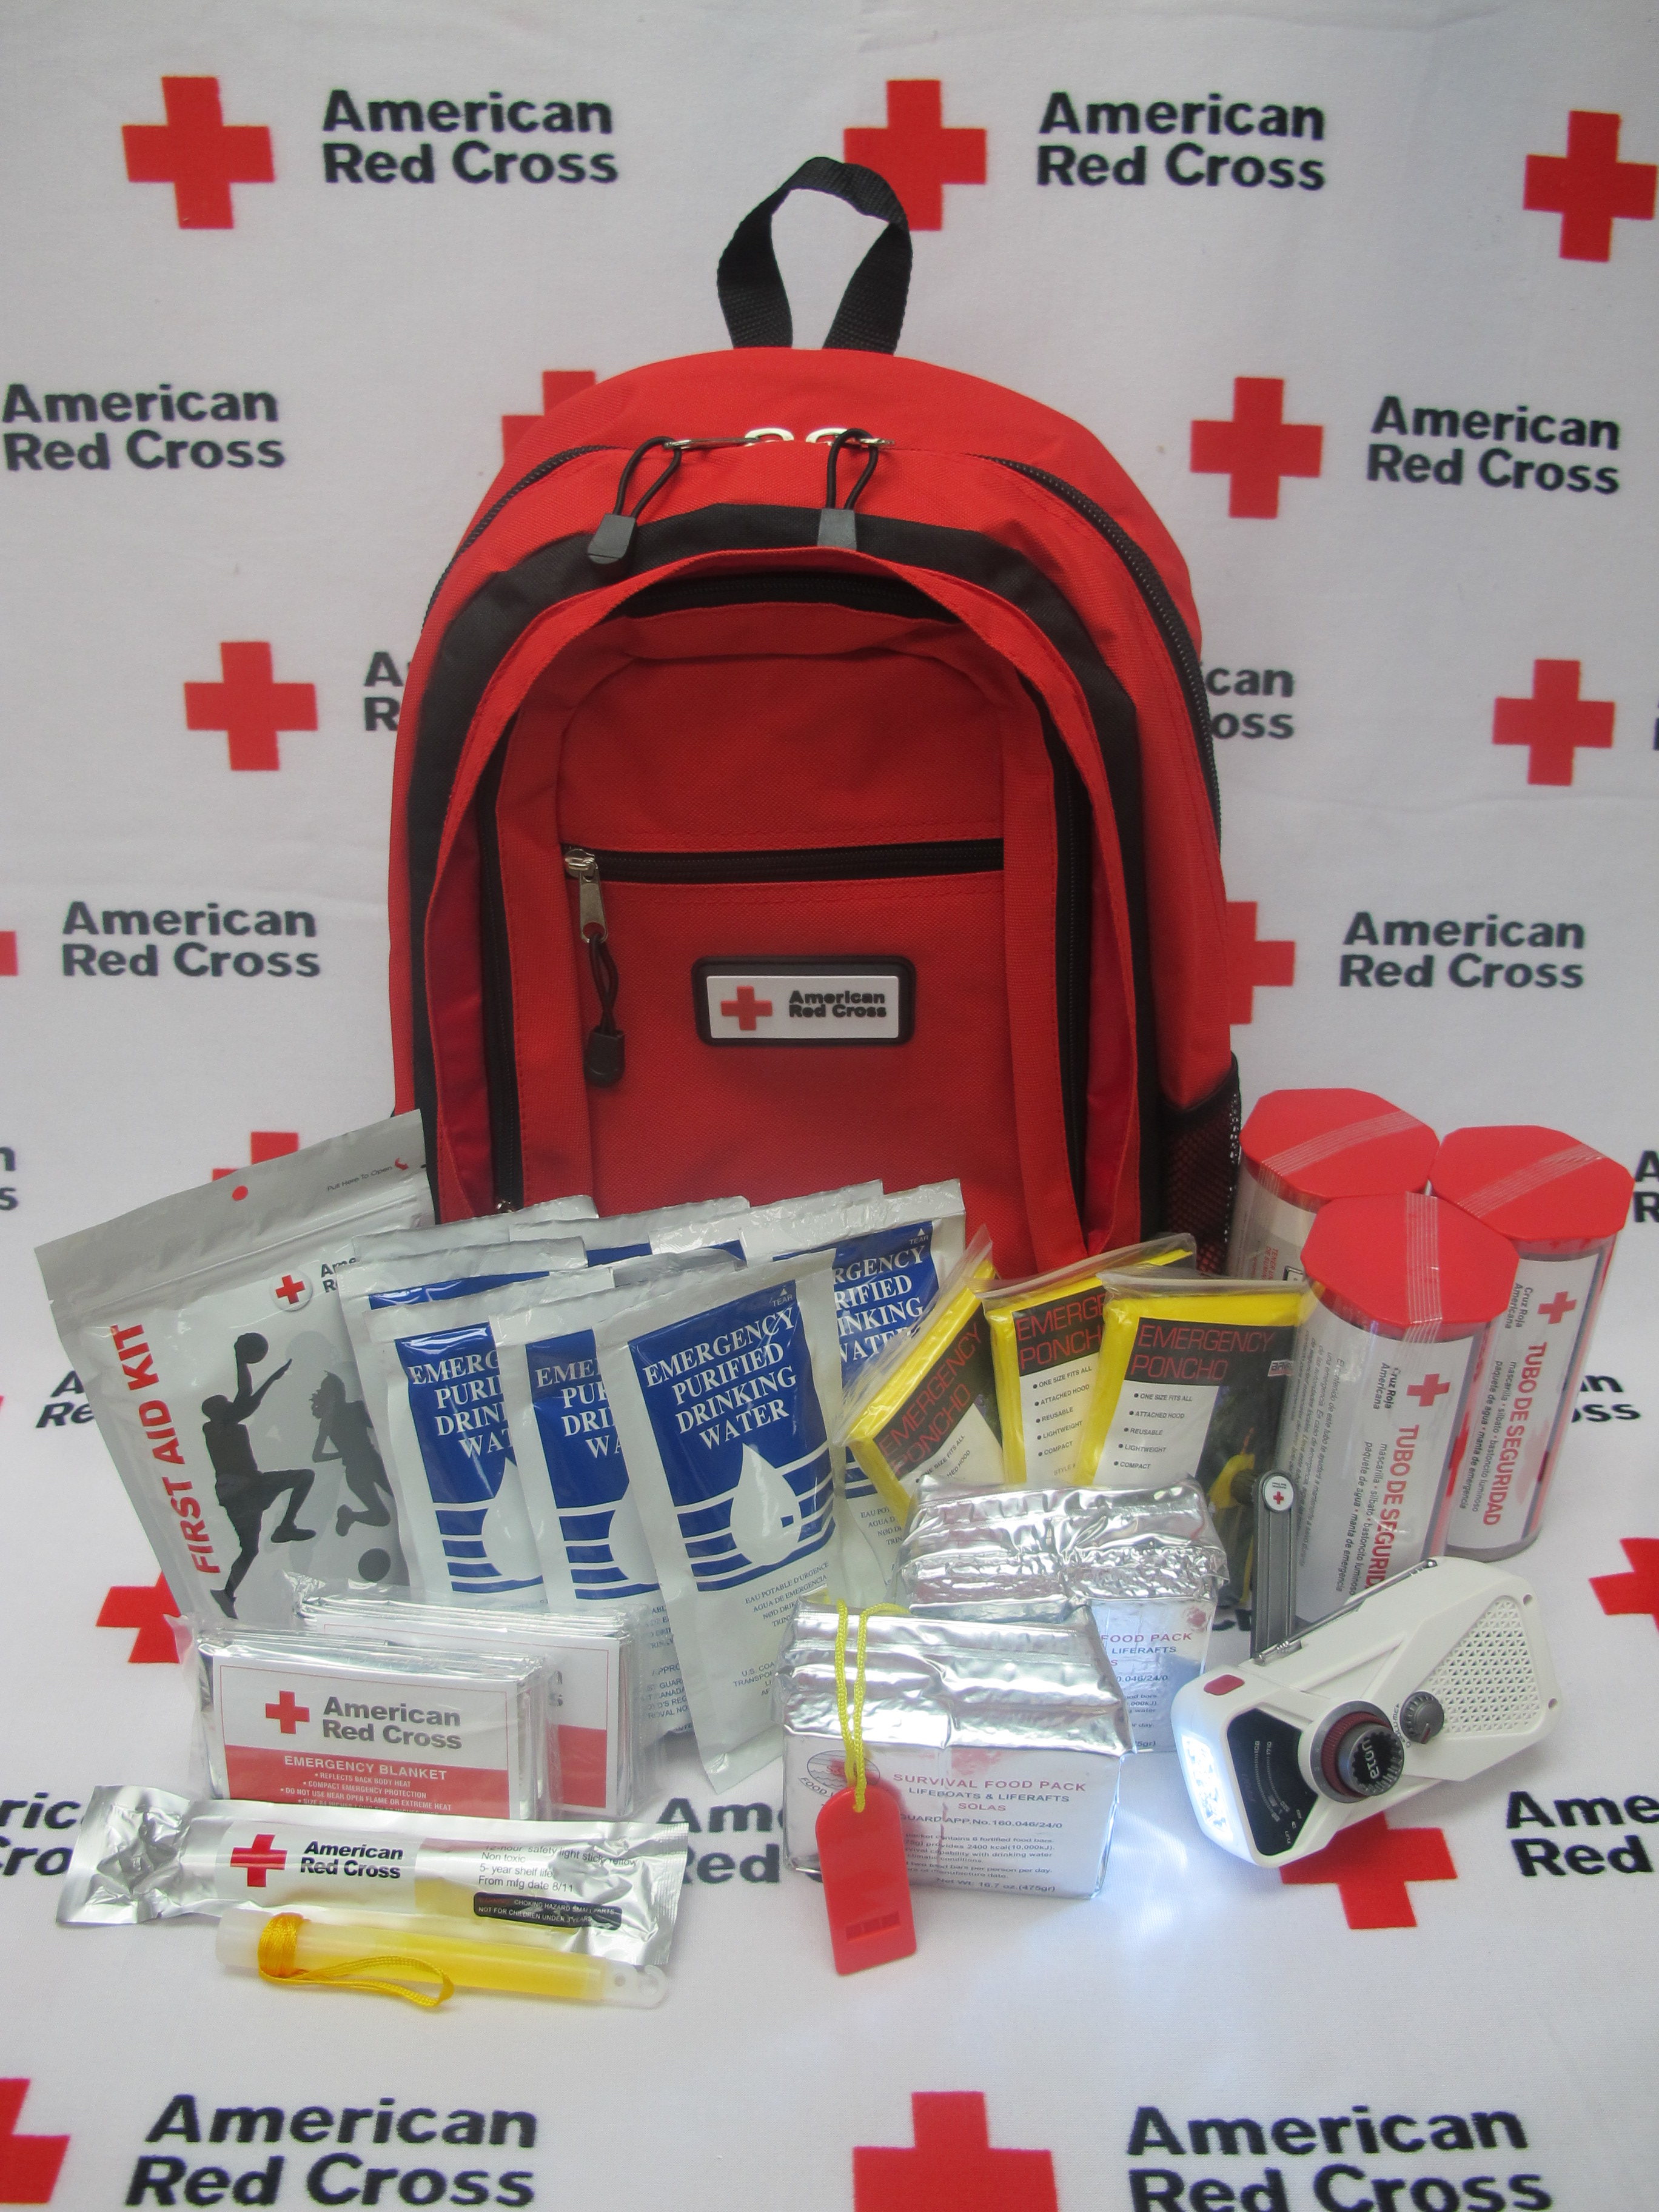 American Red Cross advises that everyone get a kit.  